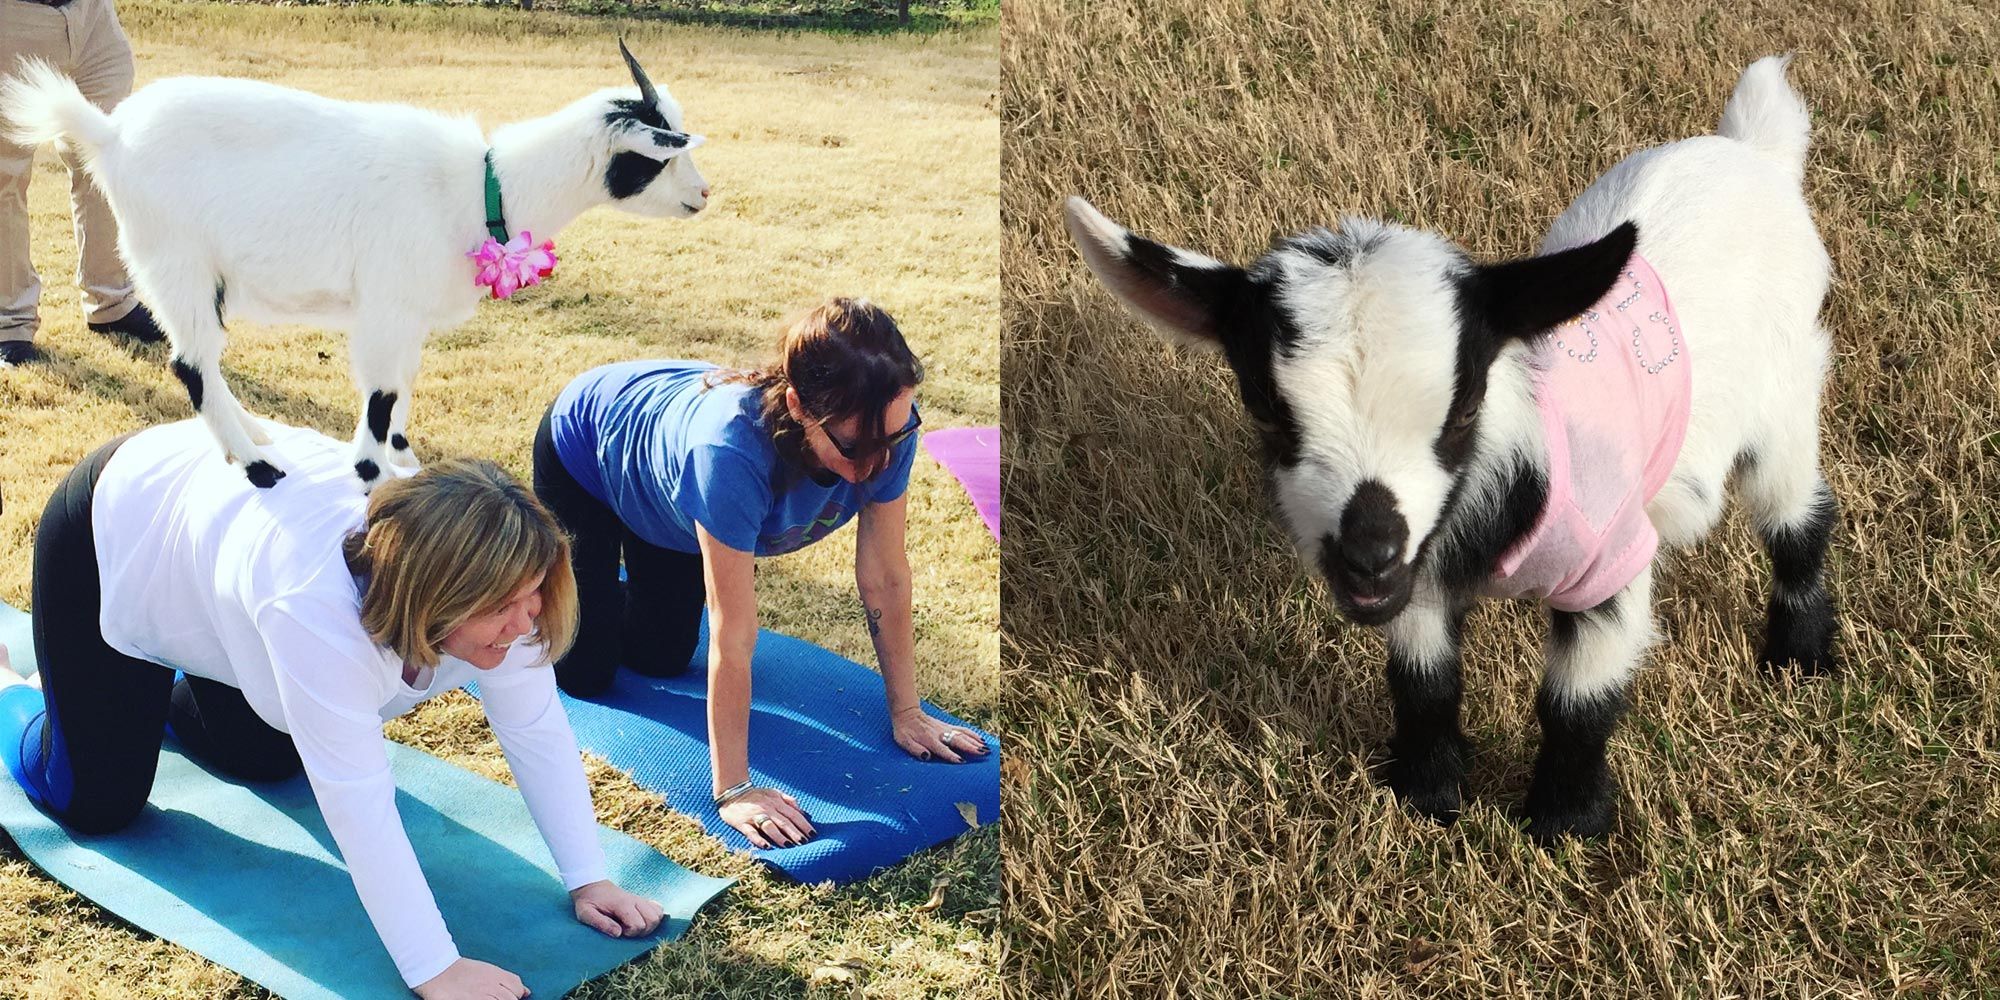 I Took a Goat Yoga Class and It Was Hilarious